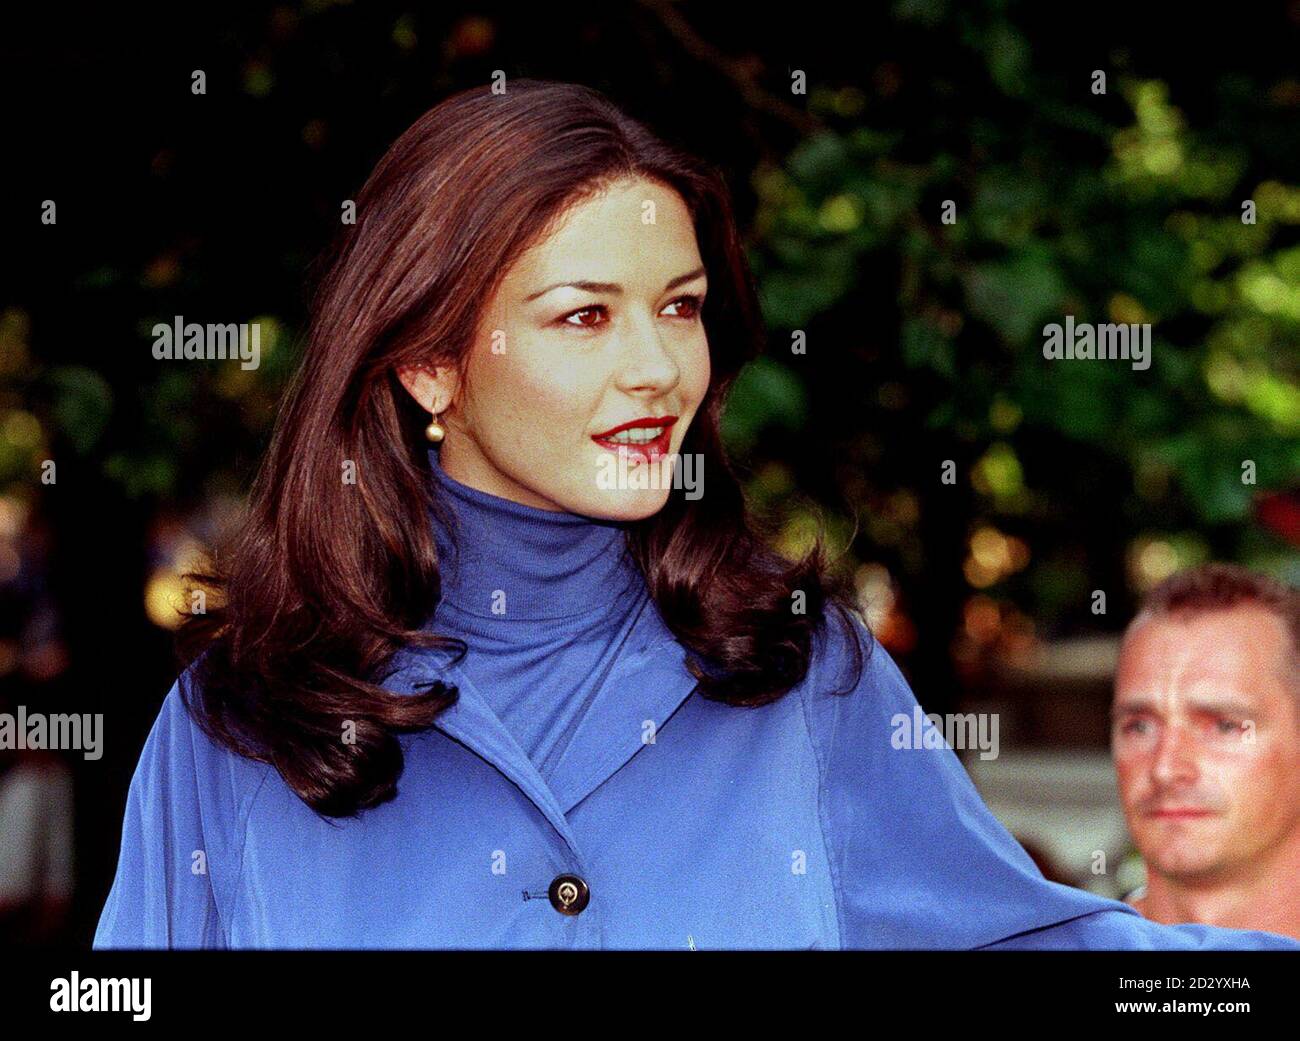 PA NEWS PHOTO 11/8/98 ON ONE OF THE HOTTEST DAYS OF THE YEAR, CATHERINE ZETA-JONES WEARS A COAT IN SOUTH EAST LONDON DURING FILMING FOR 'ENTRAPMENT' FOR RELEASE IN 1999. FILMING IS TAKING PLACE AT PINEWOOD STUDIOS & IN LONDON, SCOTLAND, KUALA LUMPUR & MALAYSIA. Stock Photo